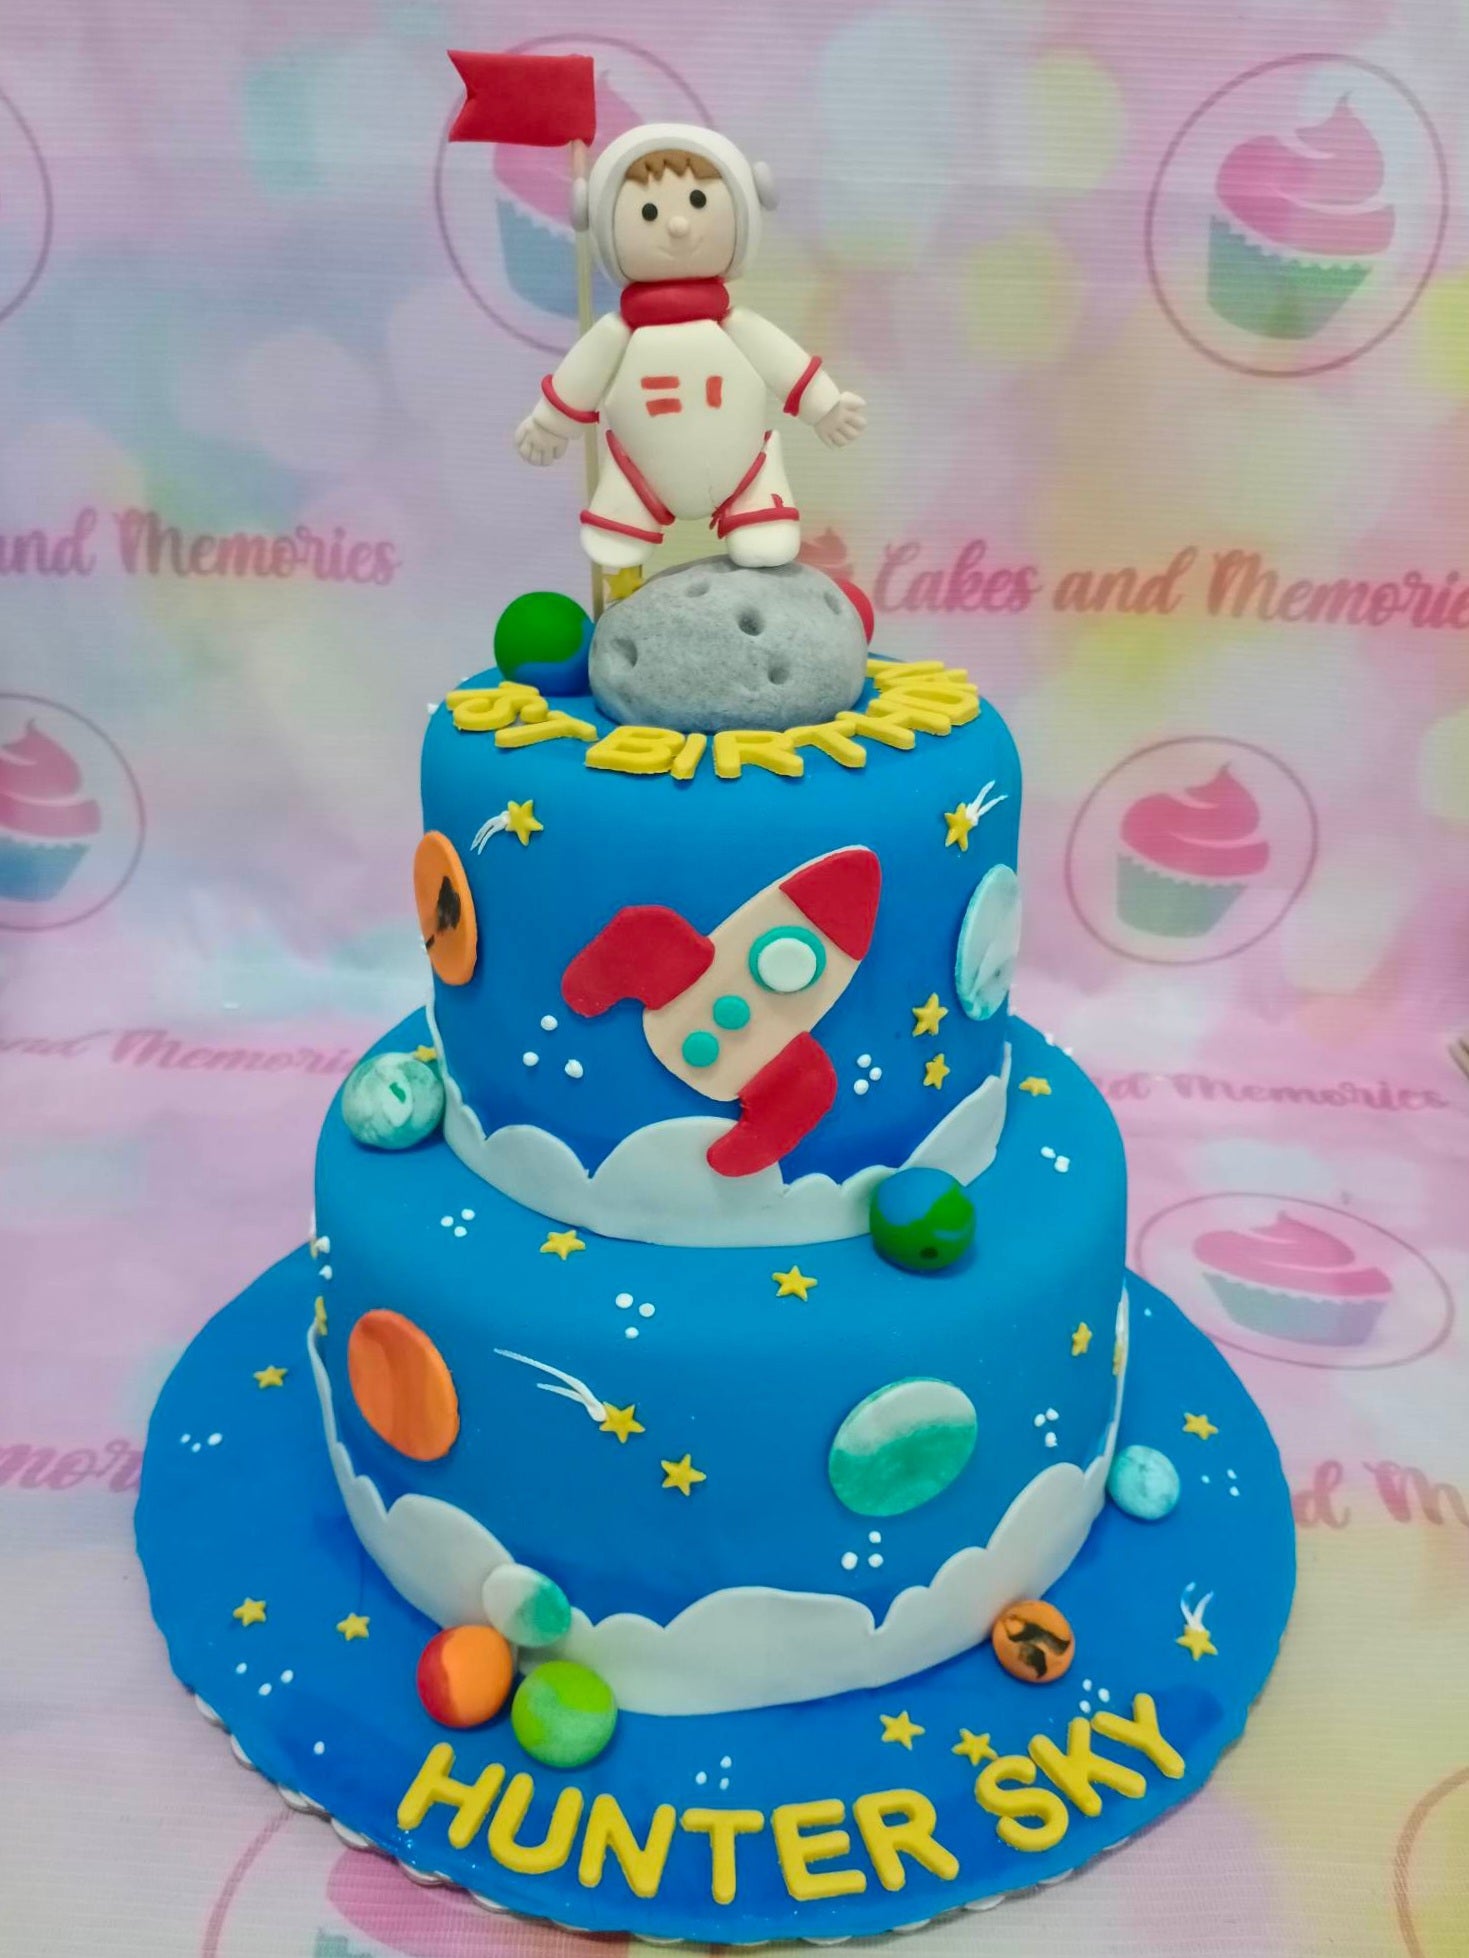 Decorate your next birthday cake with an out-of-this-world space theme. This customized cake features a colourful galaxy background and an assortment of rocketships and astronauts ready to embark on their galactic mission. Perfect for a children's birthday party, this space cake is sure to be remembered.